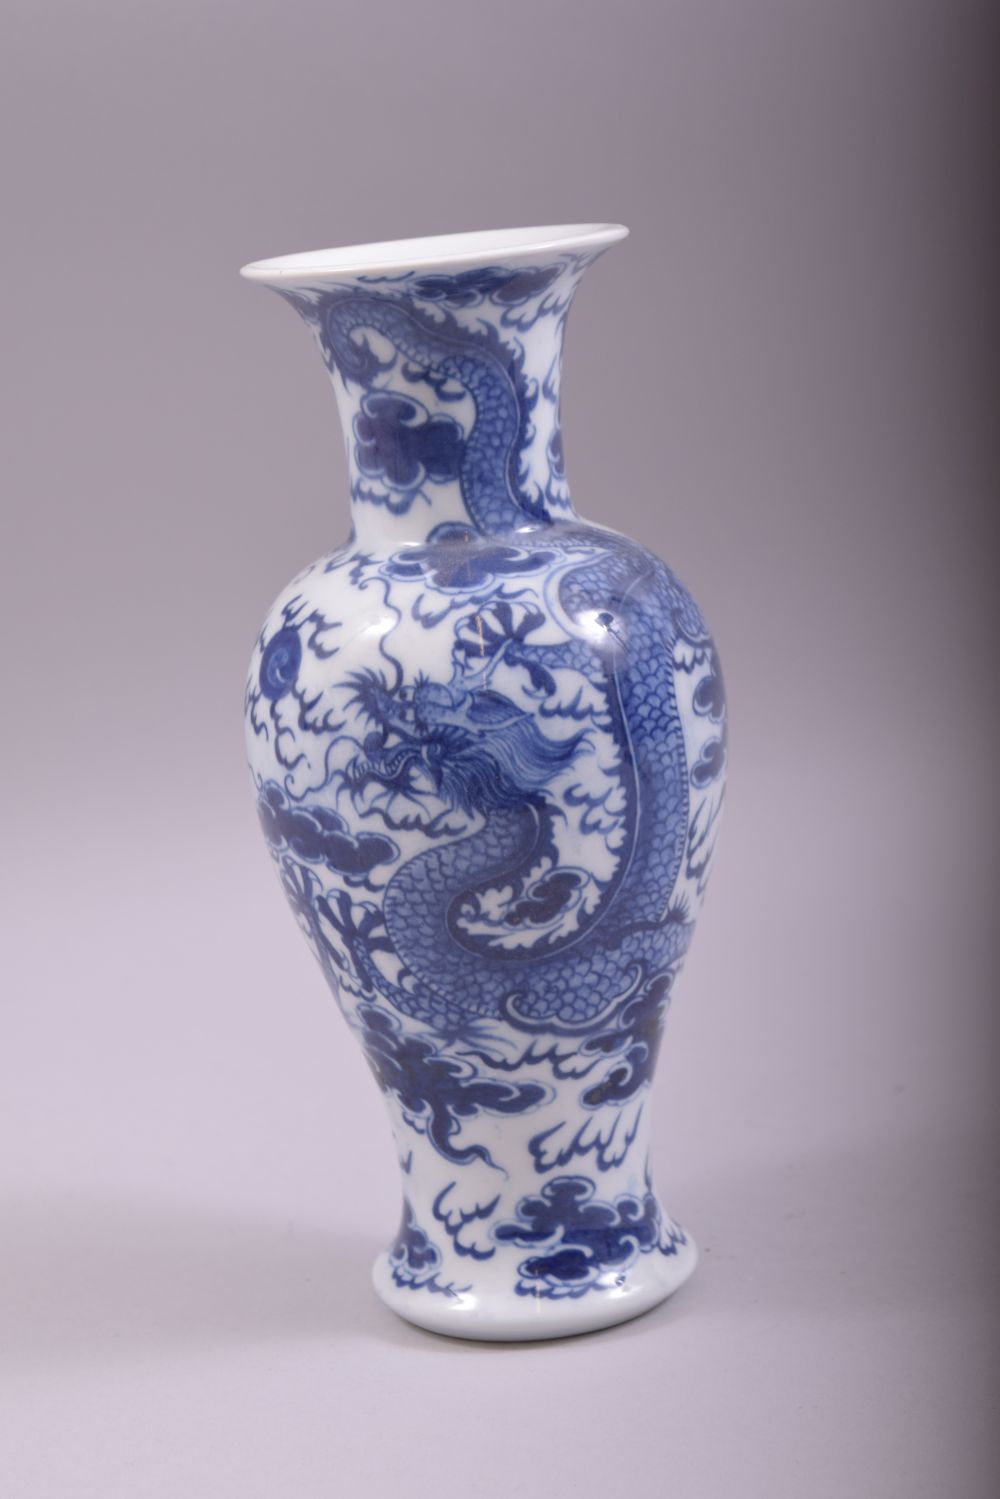 A CHINESE BLUE AND WHITE PORCELAIN DRAGON VASE, 23.5cm high. - Image 4 of 6